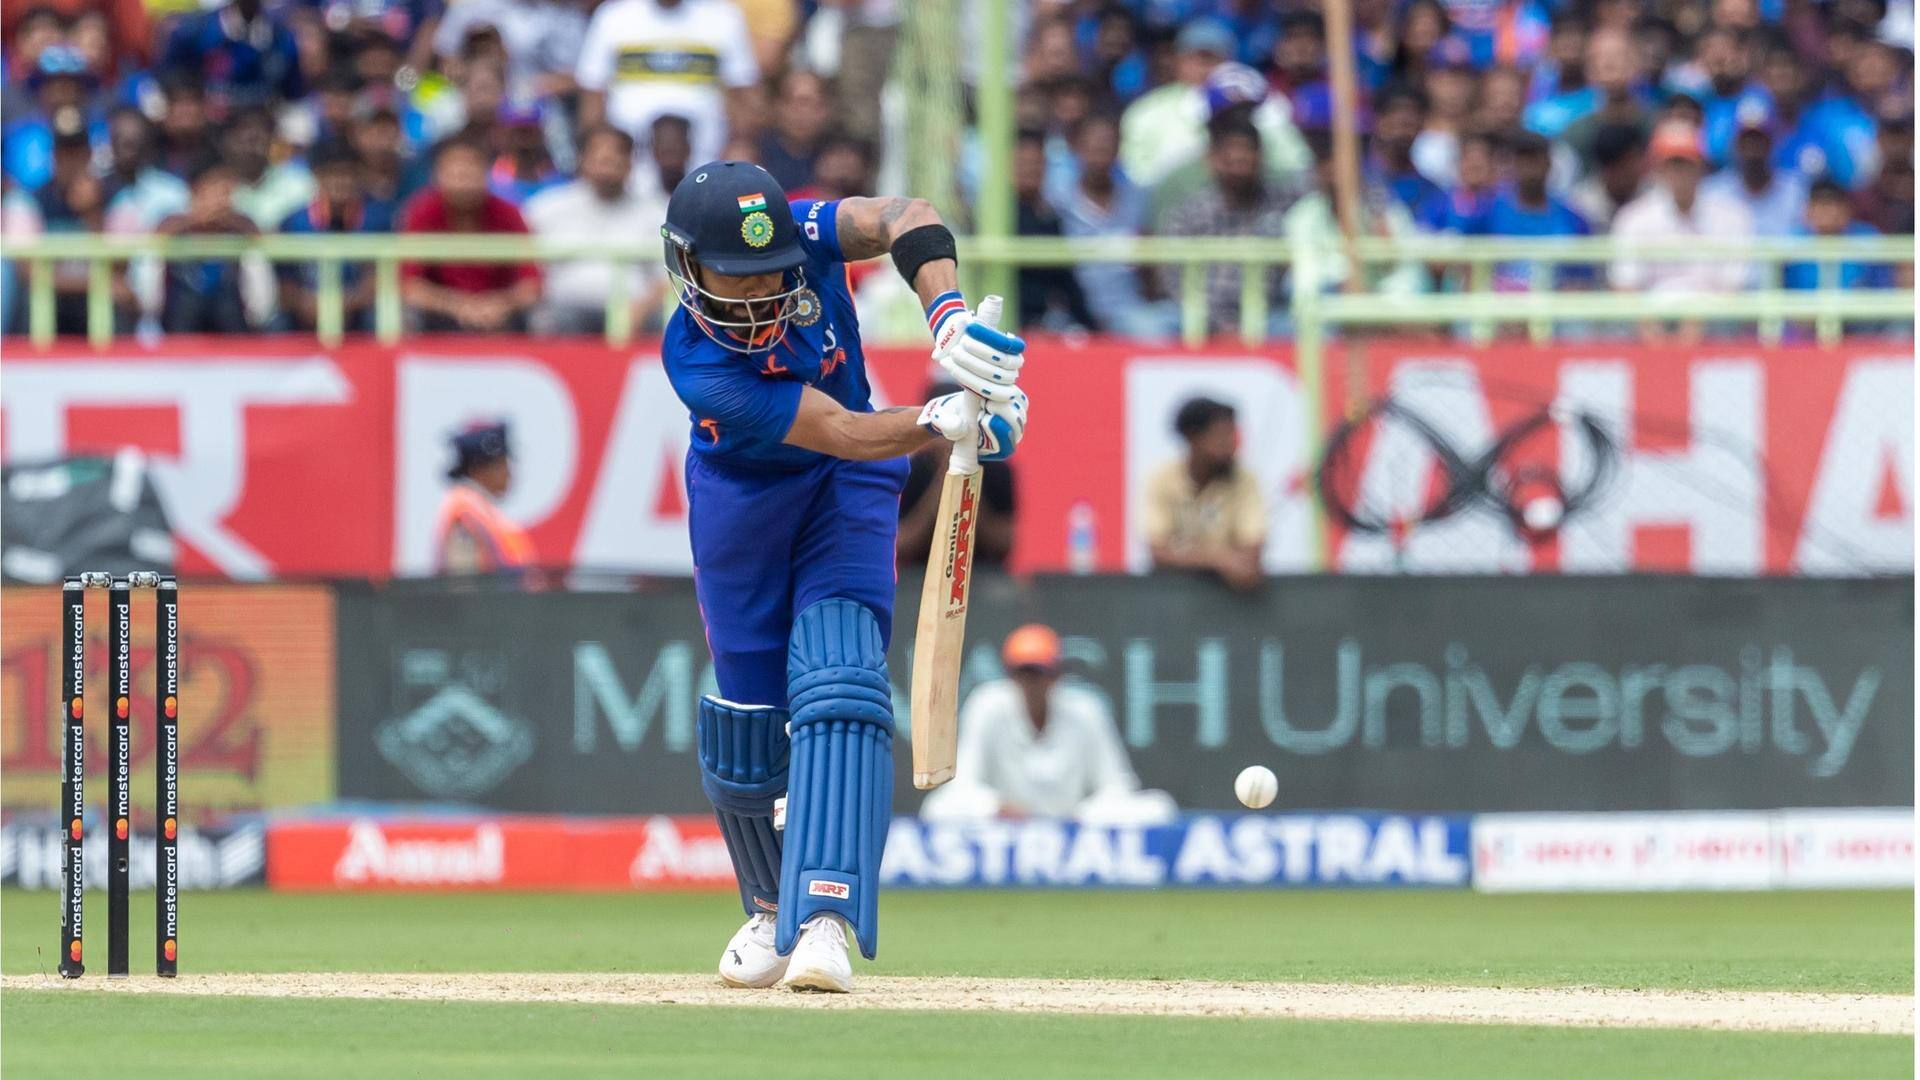 India record their lowest ODI total against Australia at home